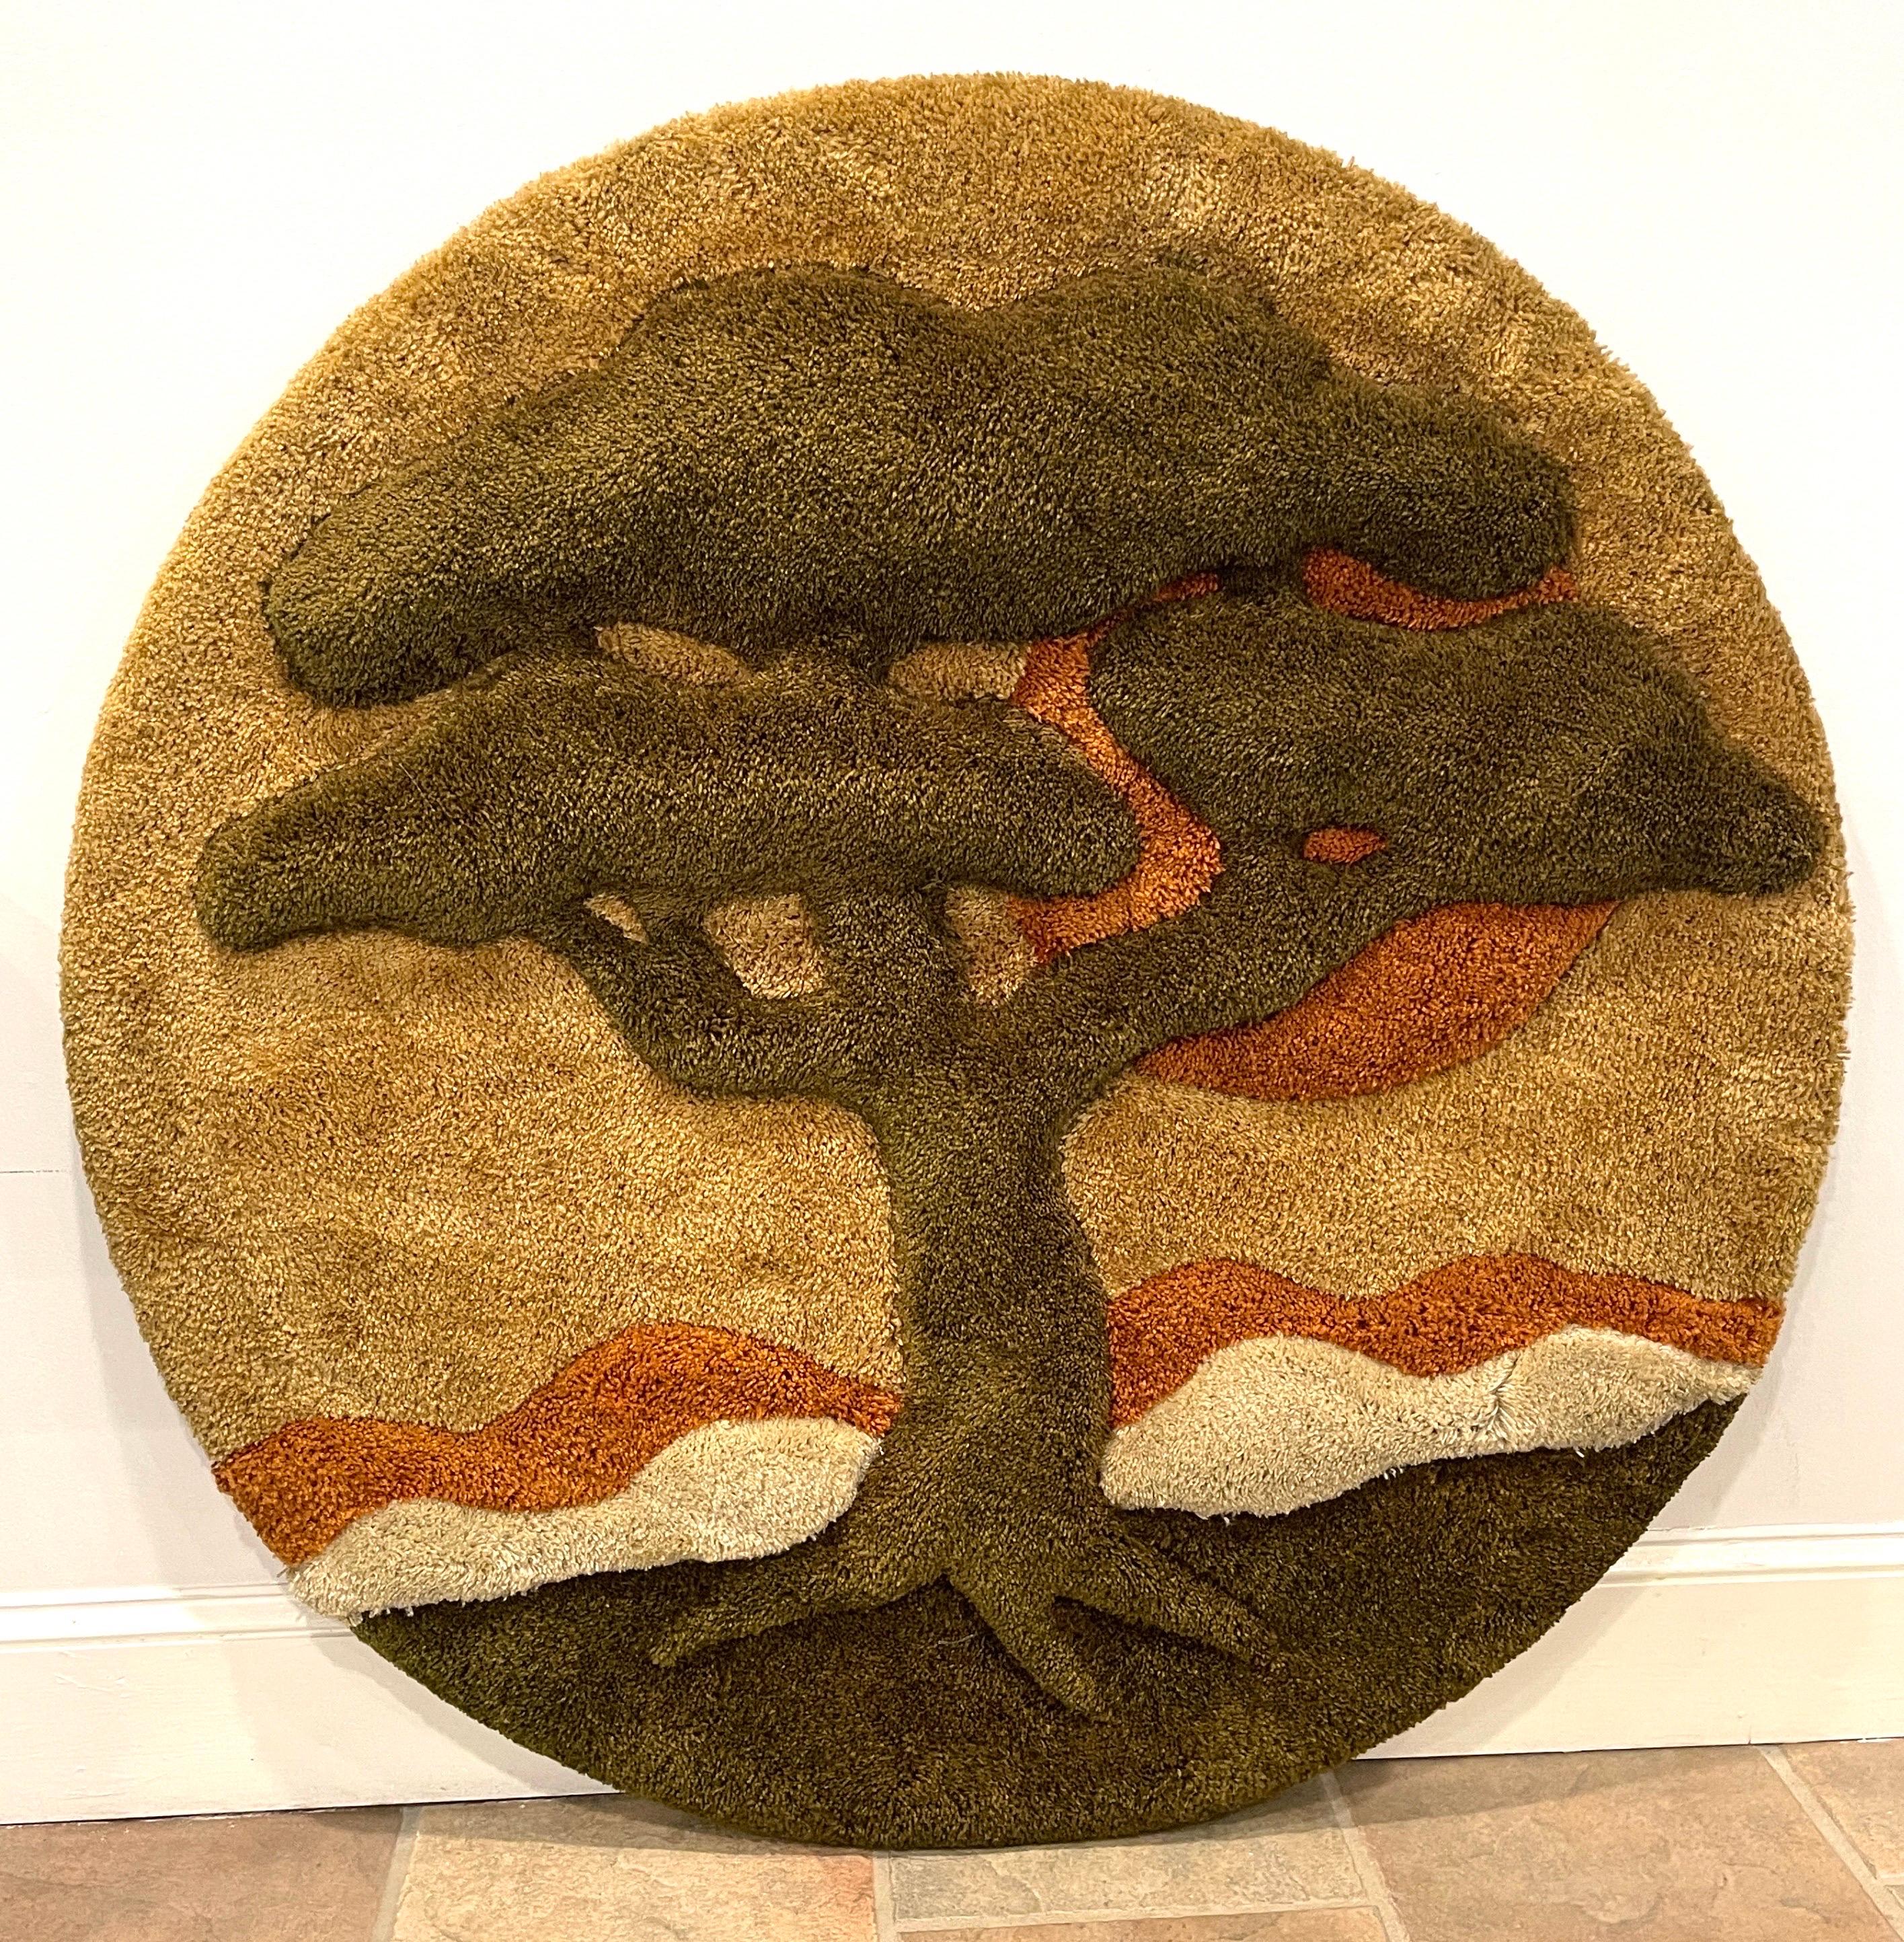 Tree of Life 1970’s fiber art wall sculpture 
USA, circa 1970s

A large scale, near mint example of an iconic 1970s landscape vignette in earth tone colors, of circular form sculpted fiber pile of dyed layered fibers. 
This Massive, 4-foot